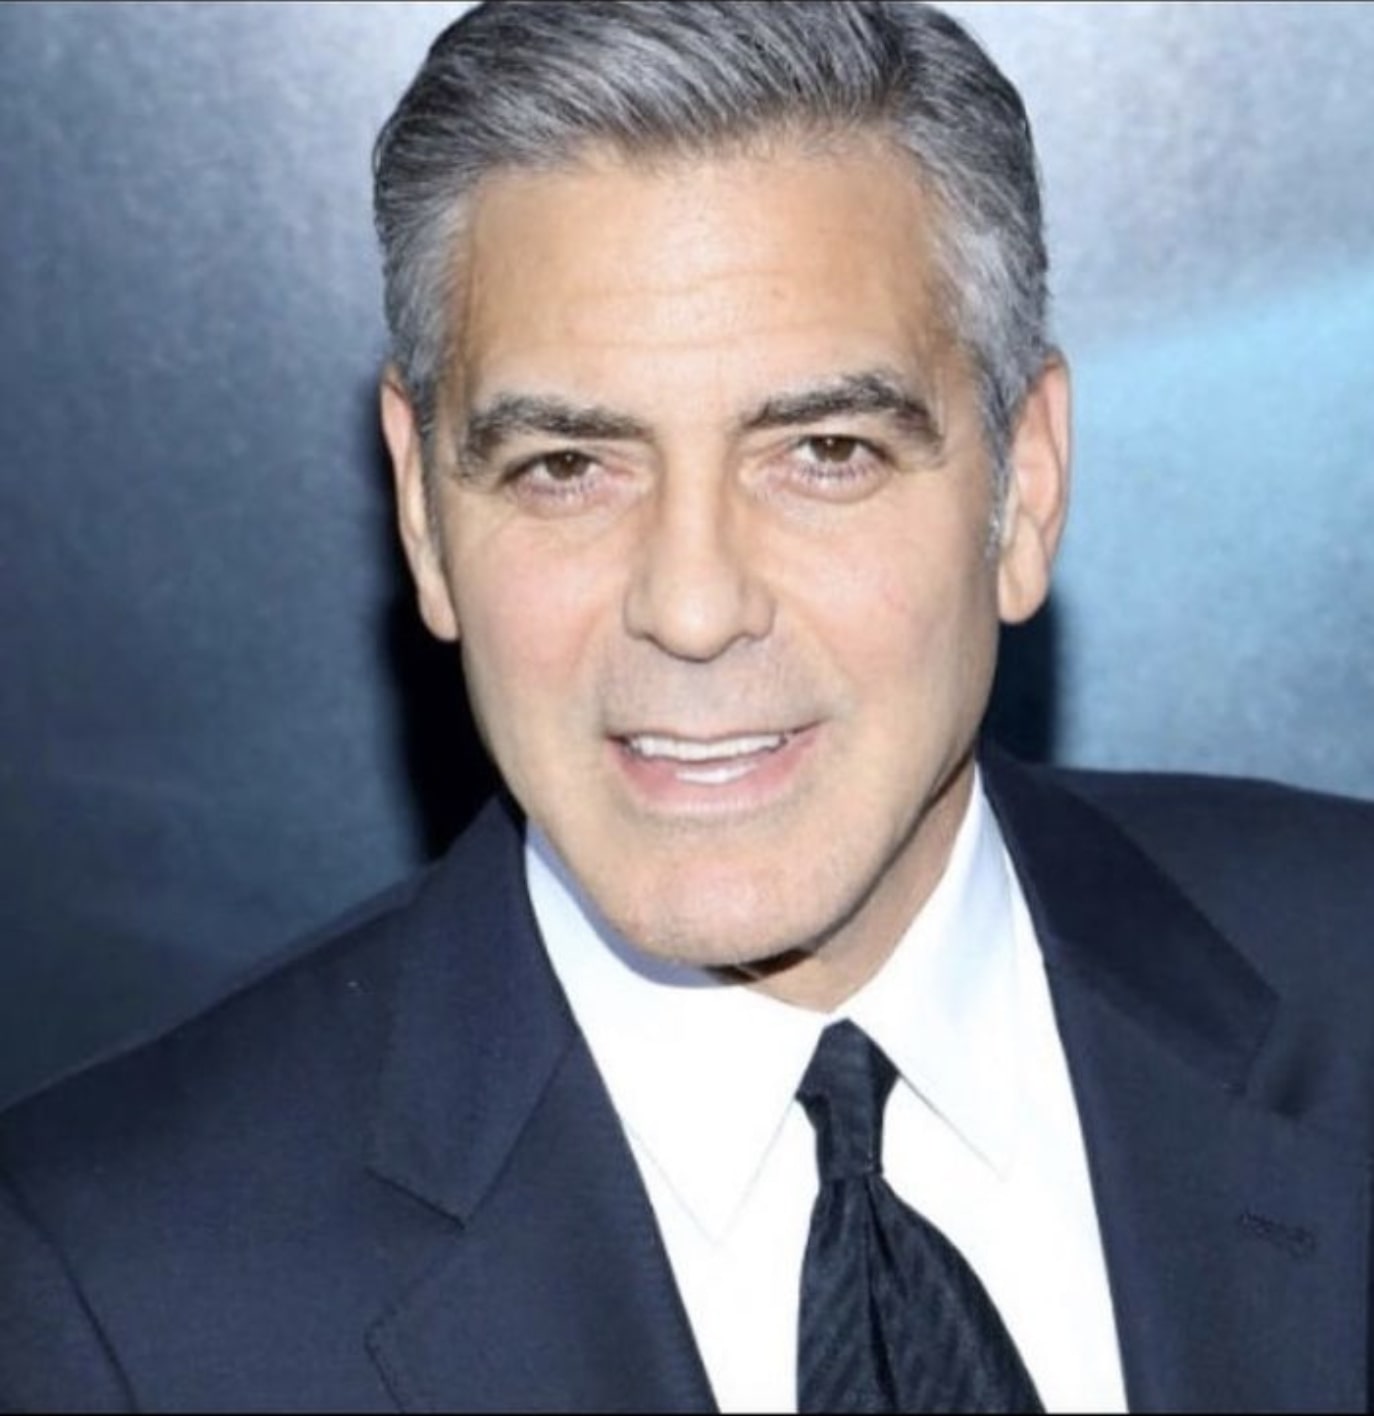 george-clooney-used-to-cut-tobacco-for-$3.30-an-hour